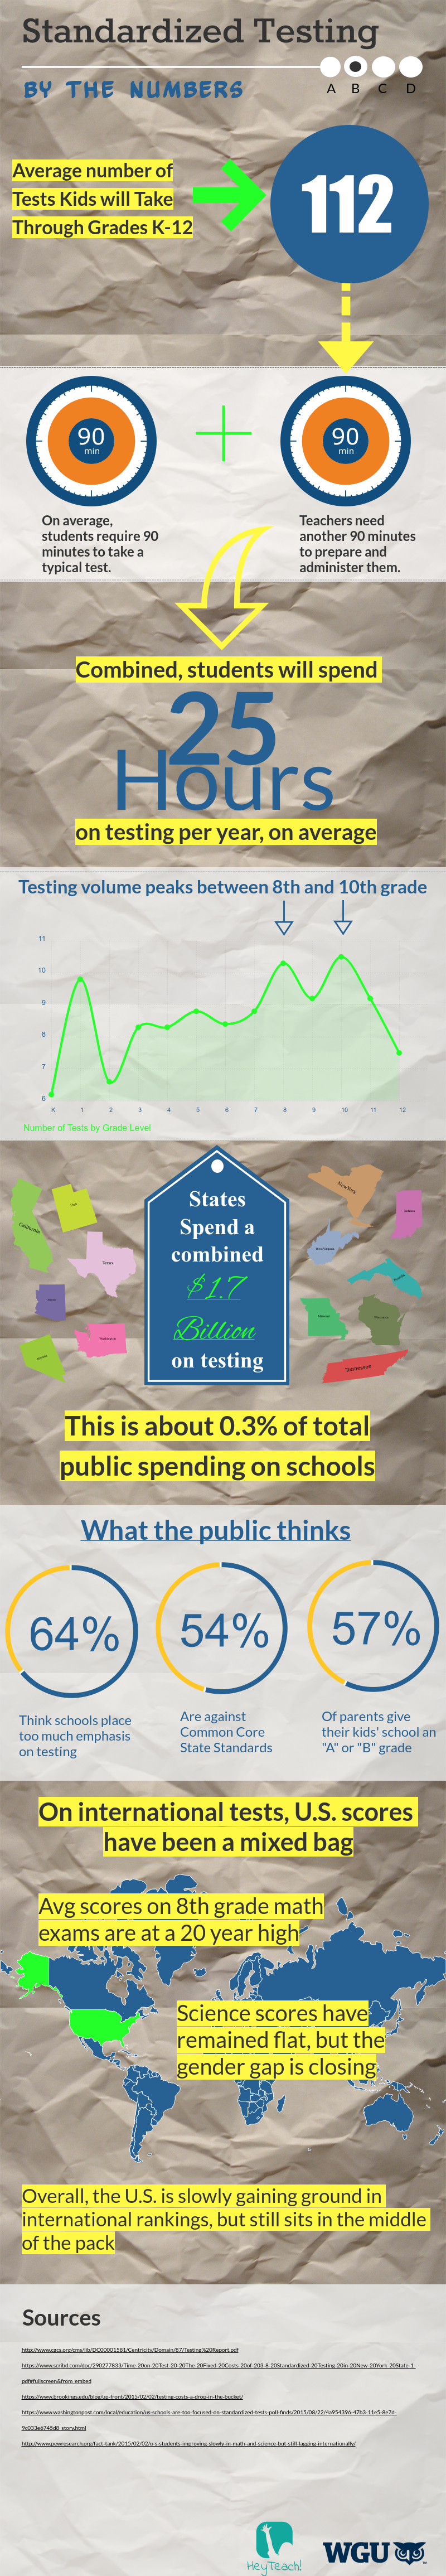 Facts about standardized testing